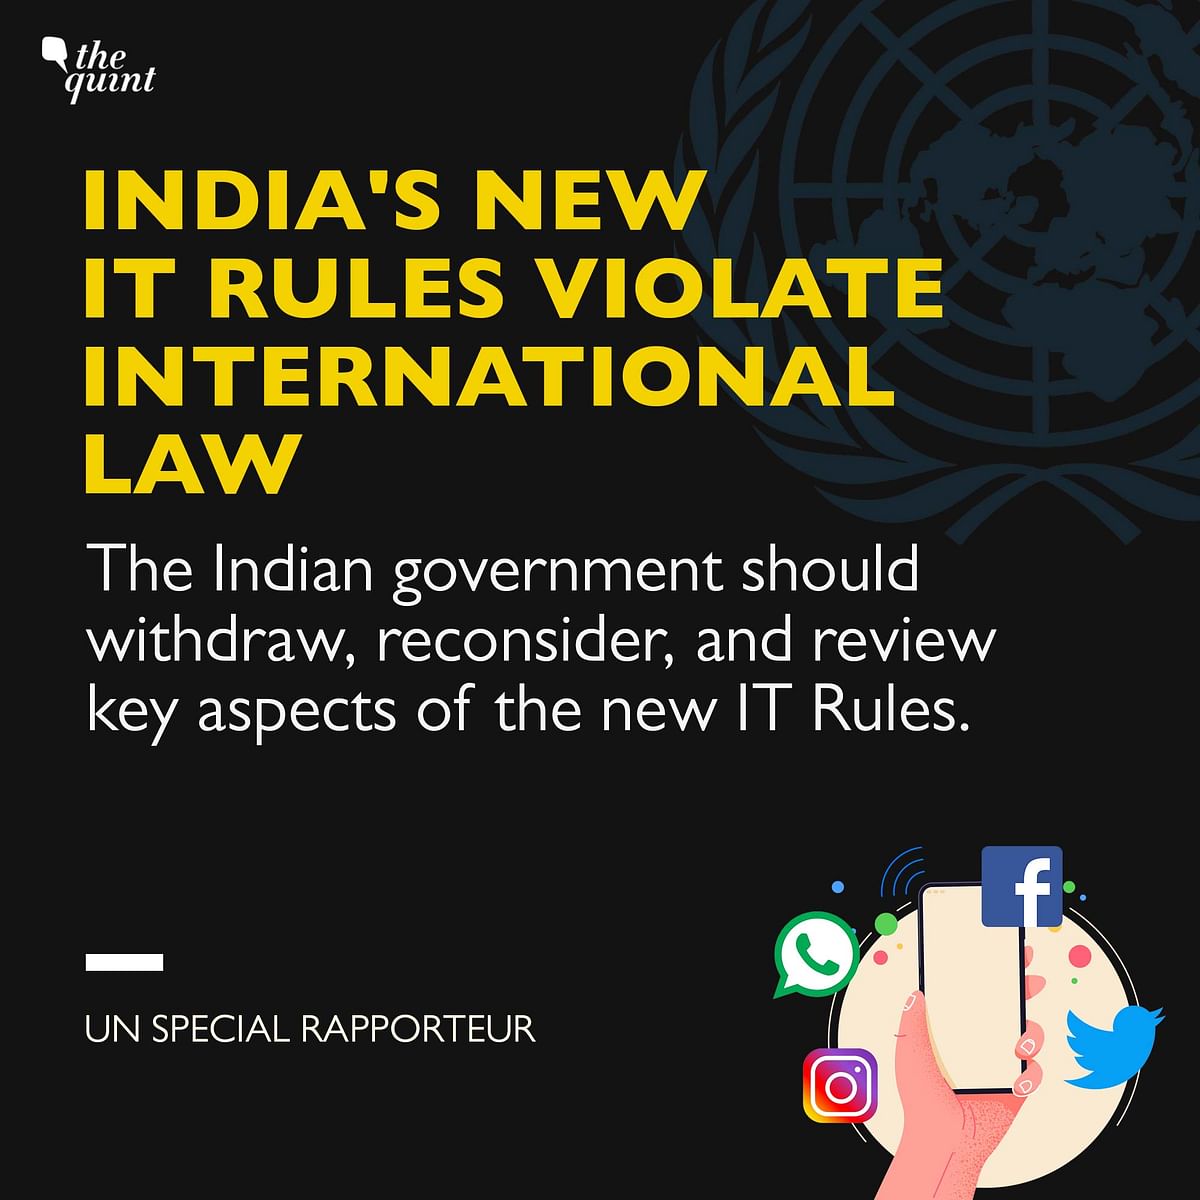 UN expresses concern over India’s new IT Rules